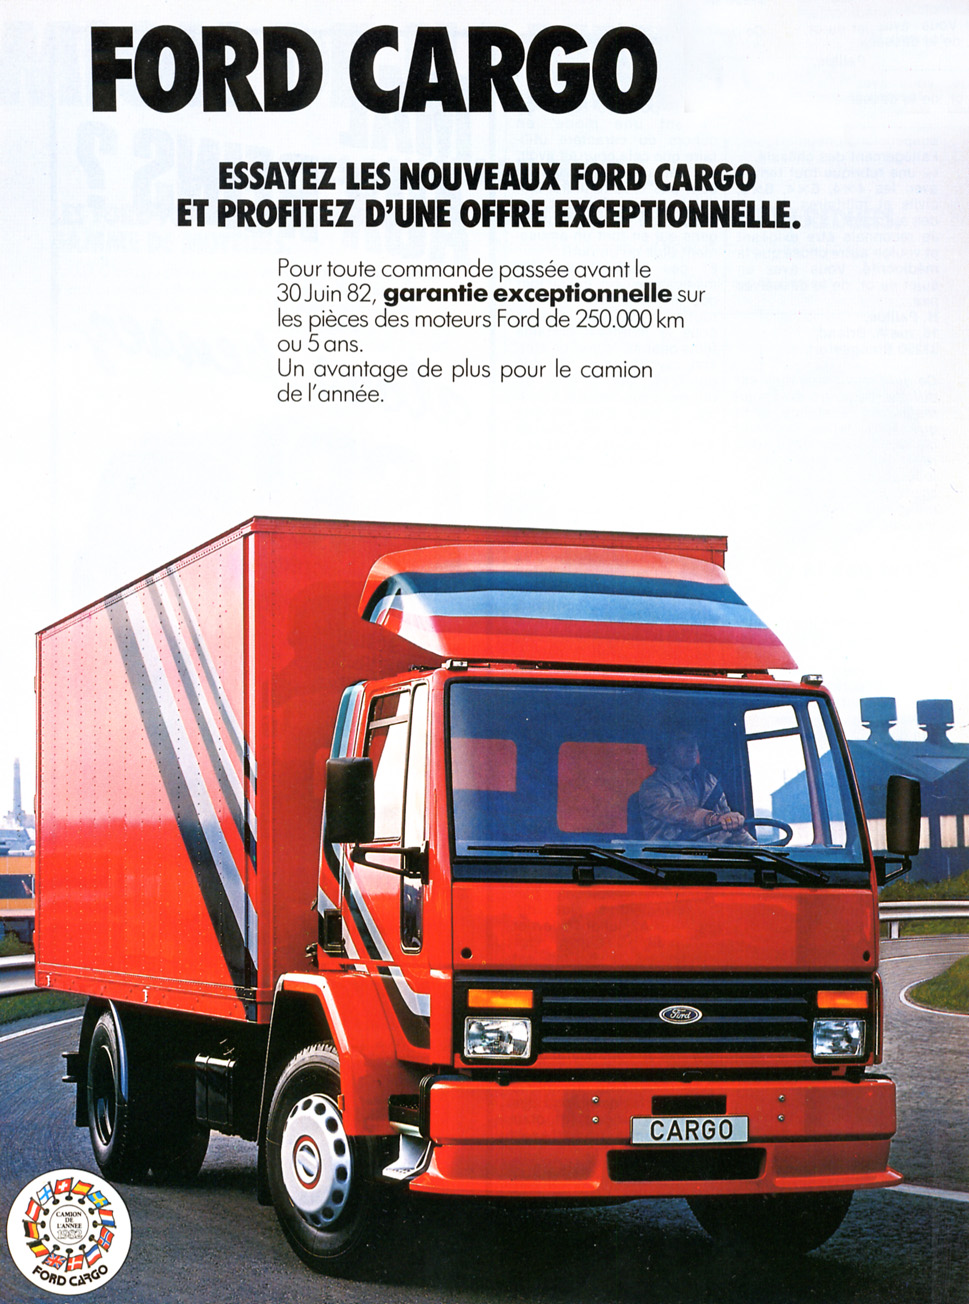 [French+Ford_Cargo+Catalogue+1982.JPG]